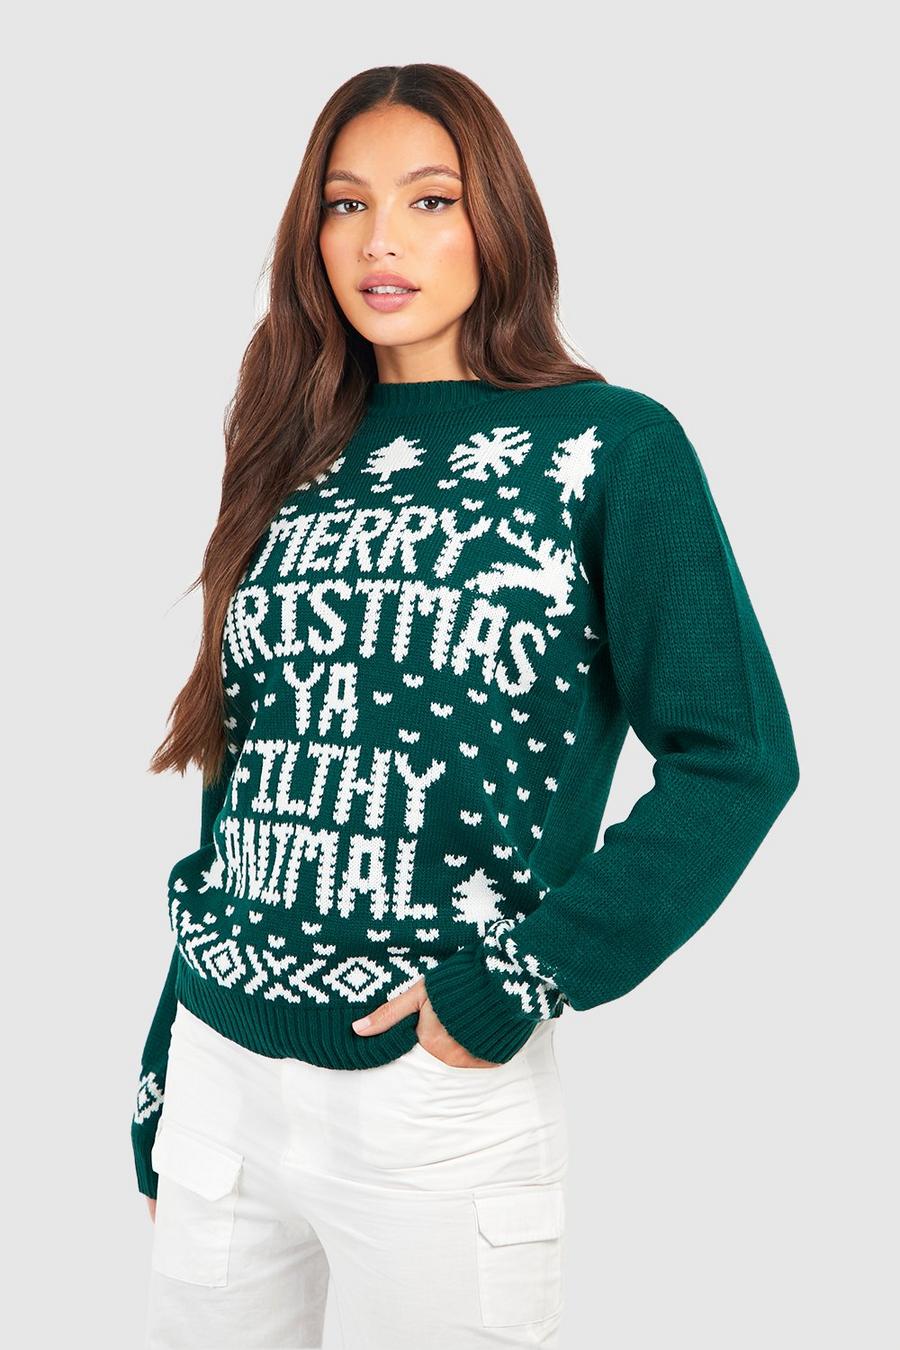 Bottle Tall Filthy Animal Christmas Jumper image number 1